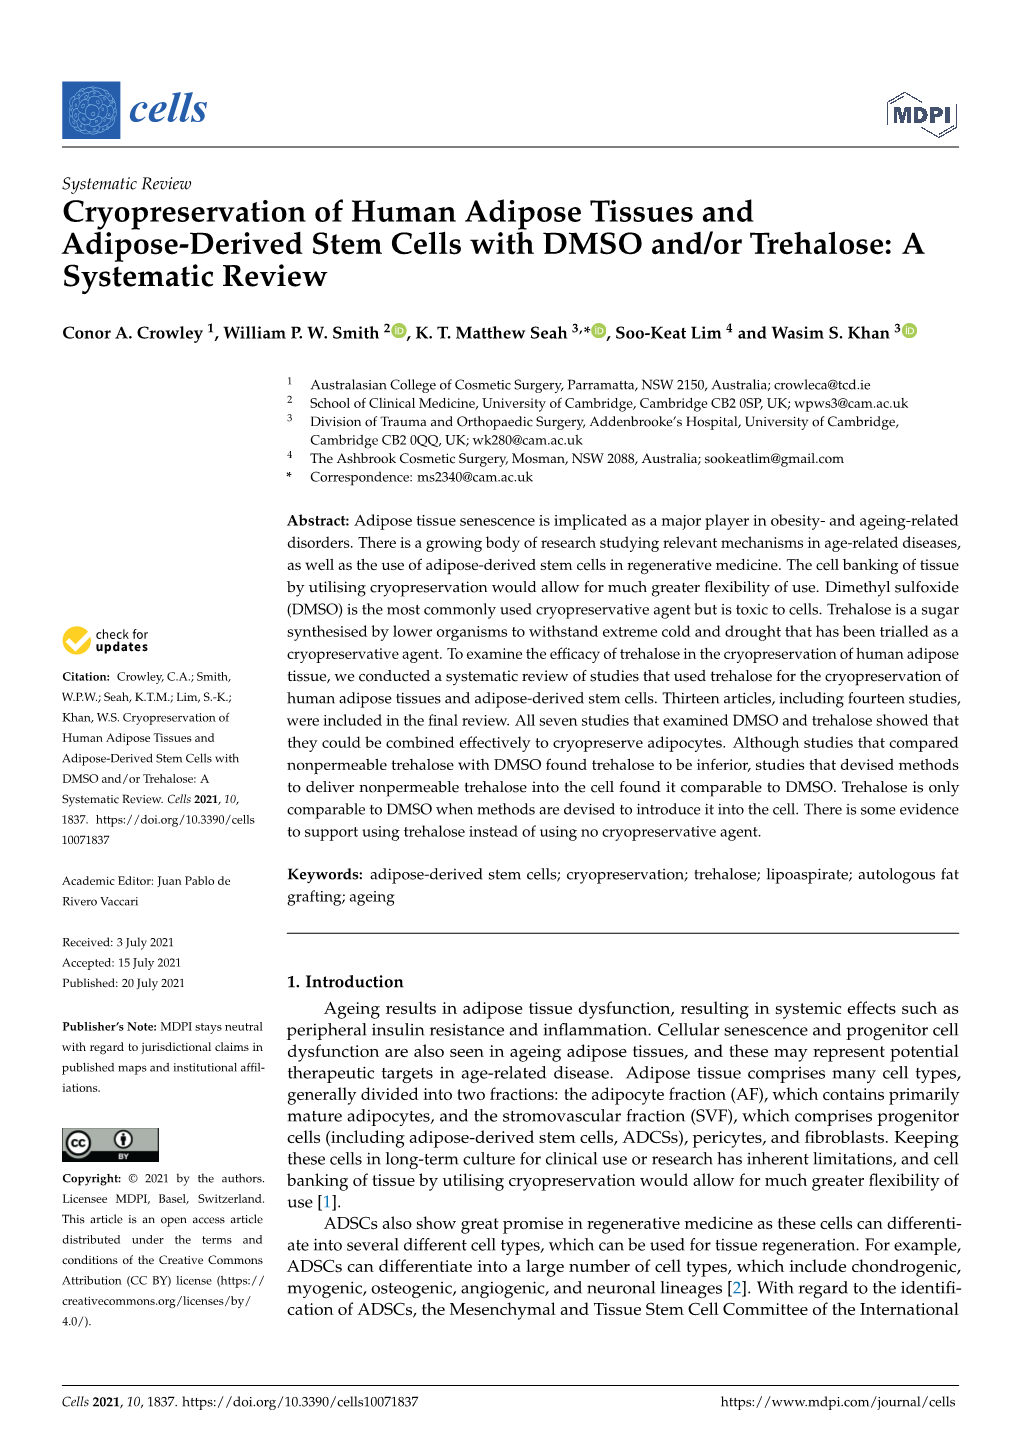 Cryopreservation of Human Adipose Tissues and Adipose-Derived Stem Cells with DMSO And/Or Trehalose: a Systematic Review